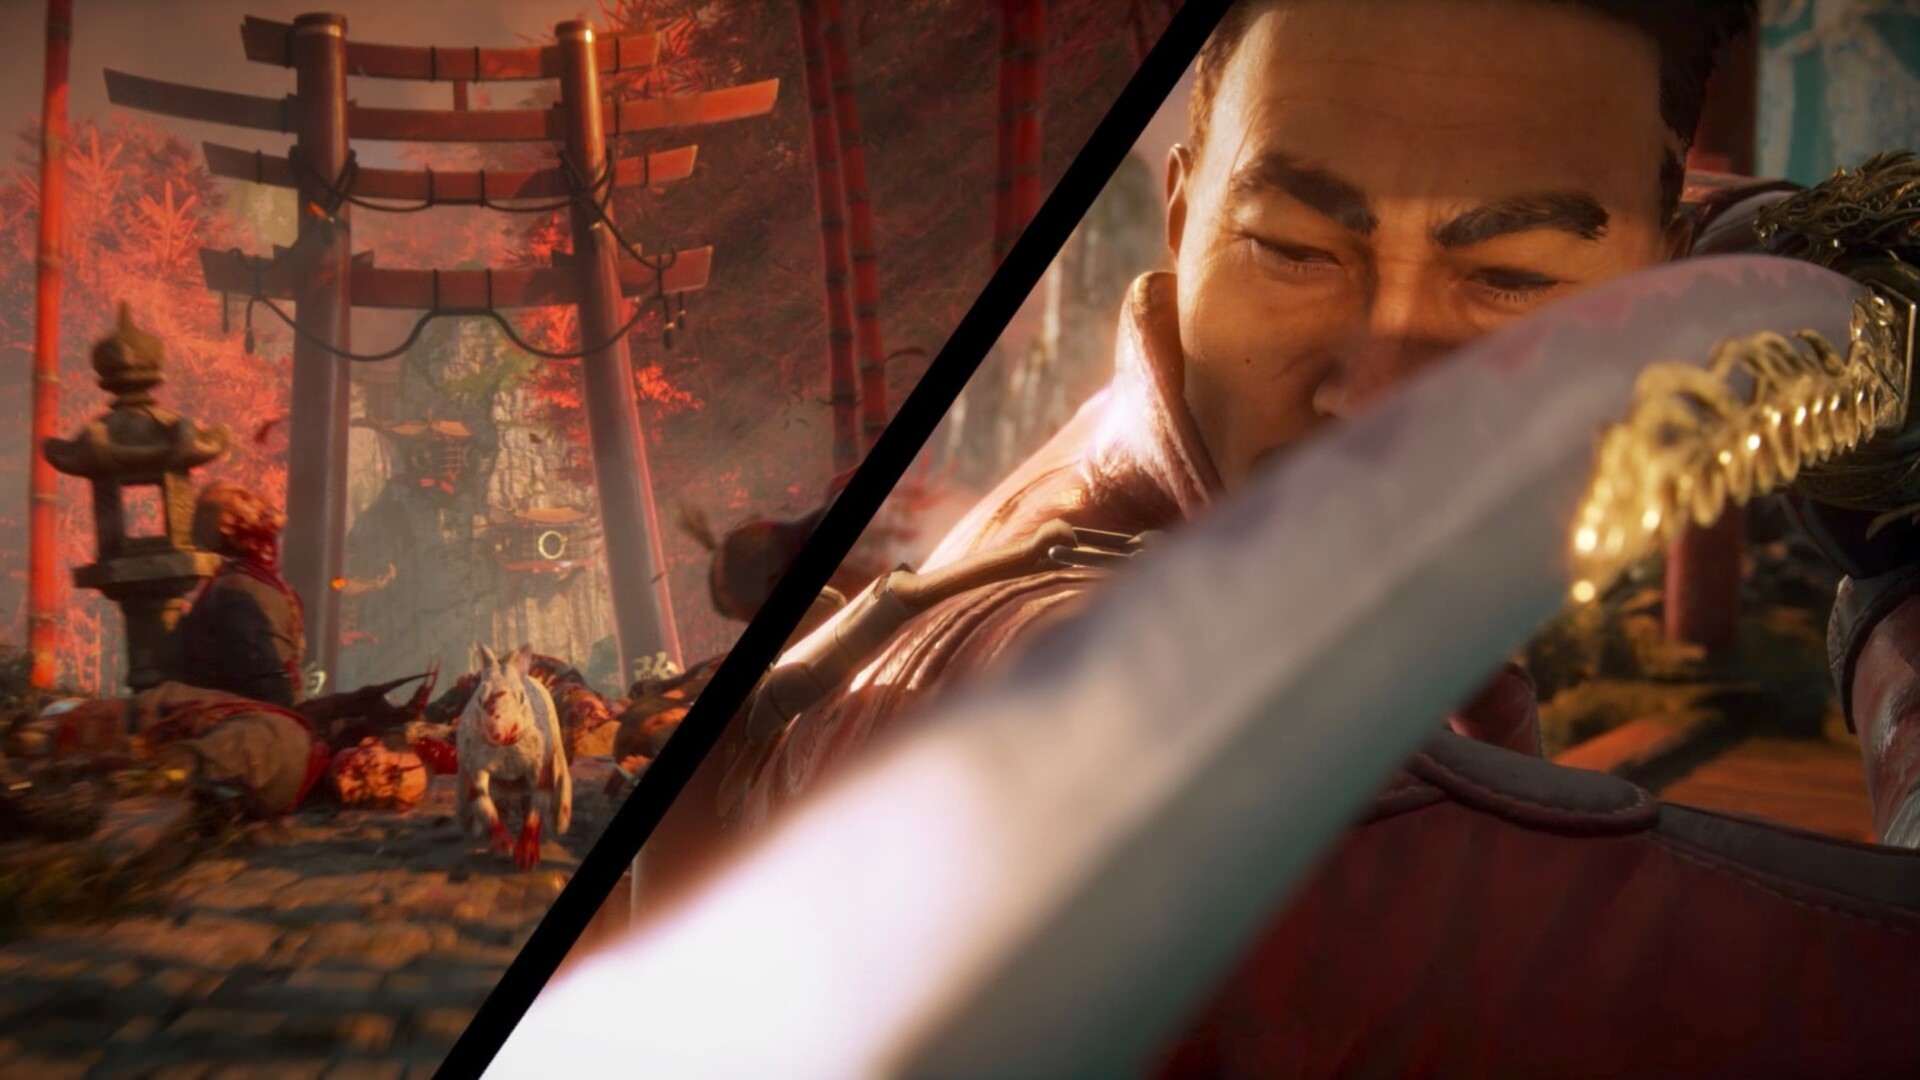 Shadow Warrior 3 Review – The Good, The Bad, and The Wang